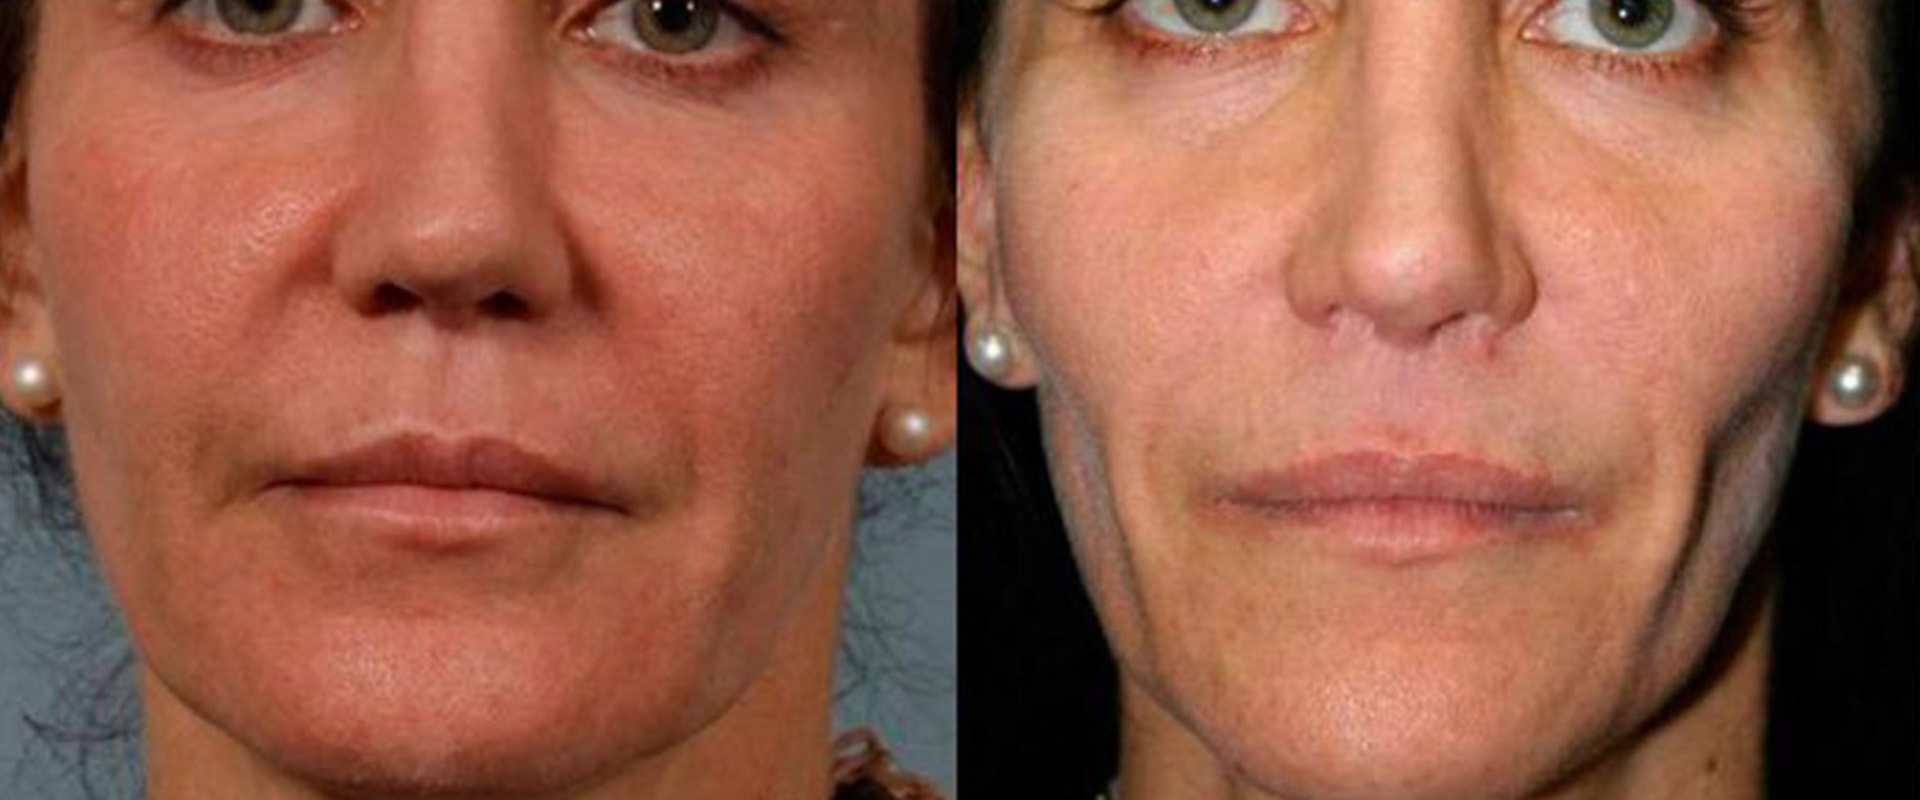 Can you buy dermal fillers over the counter?